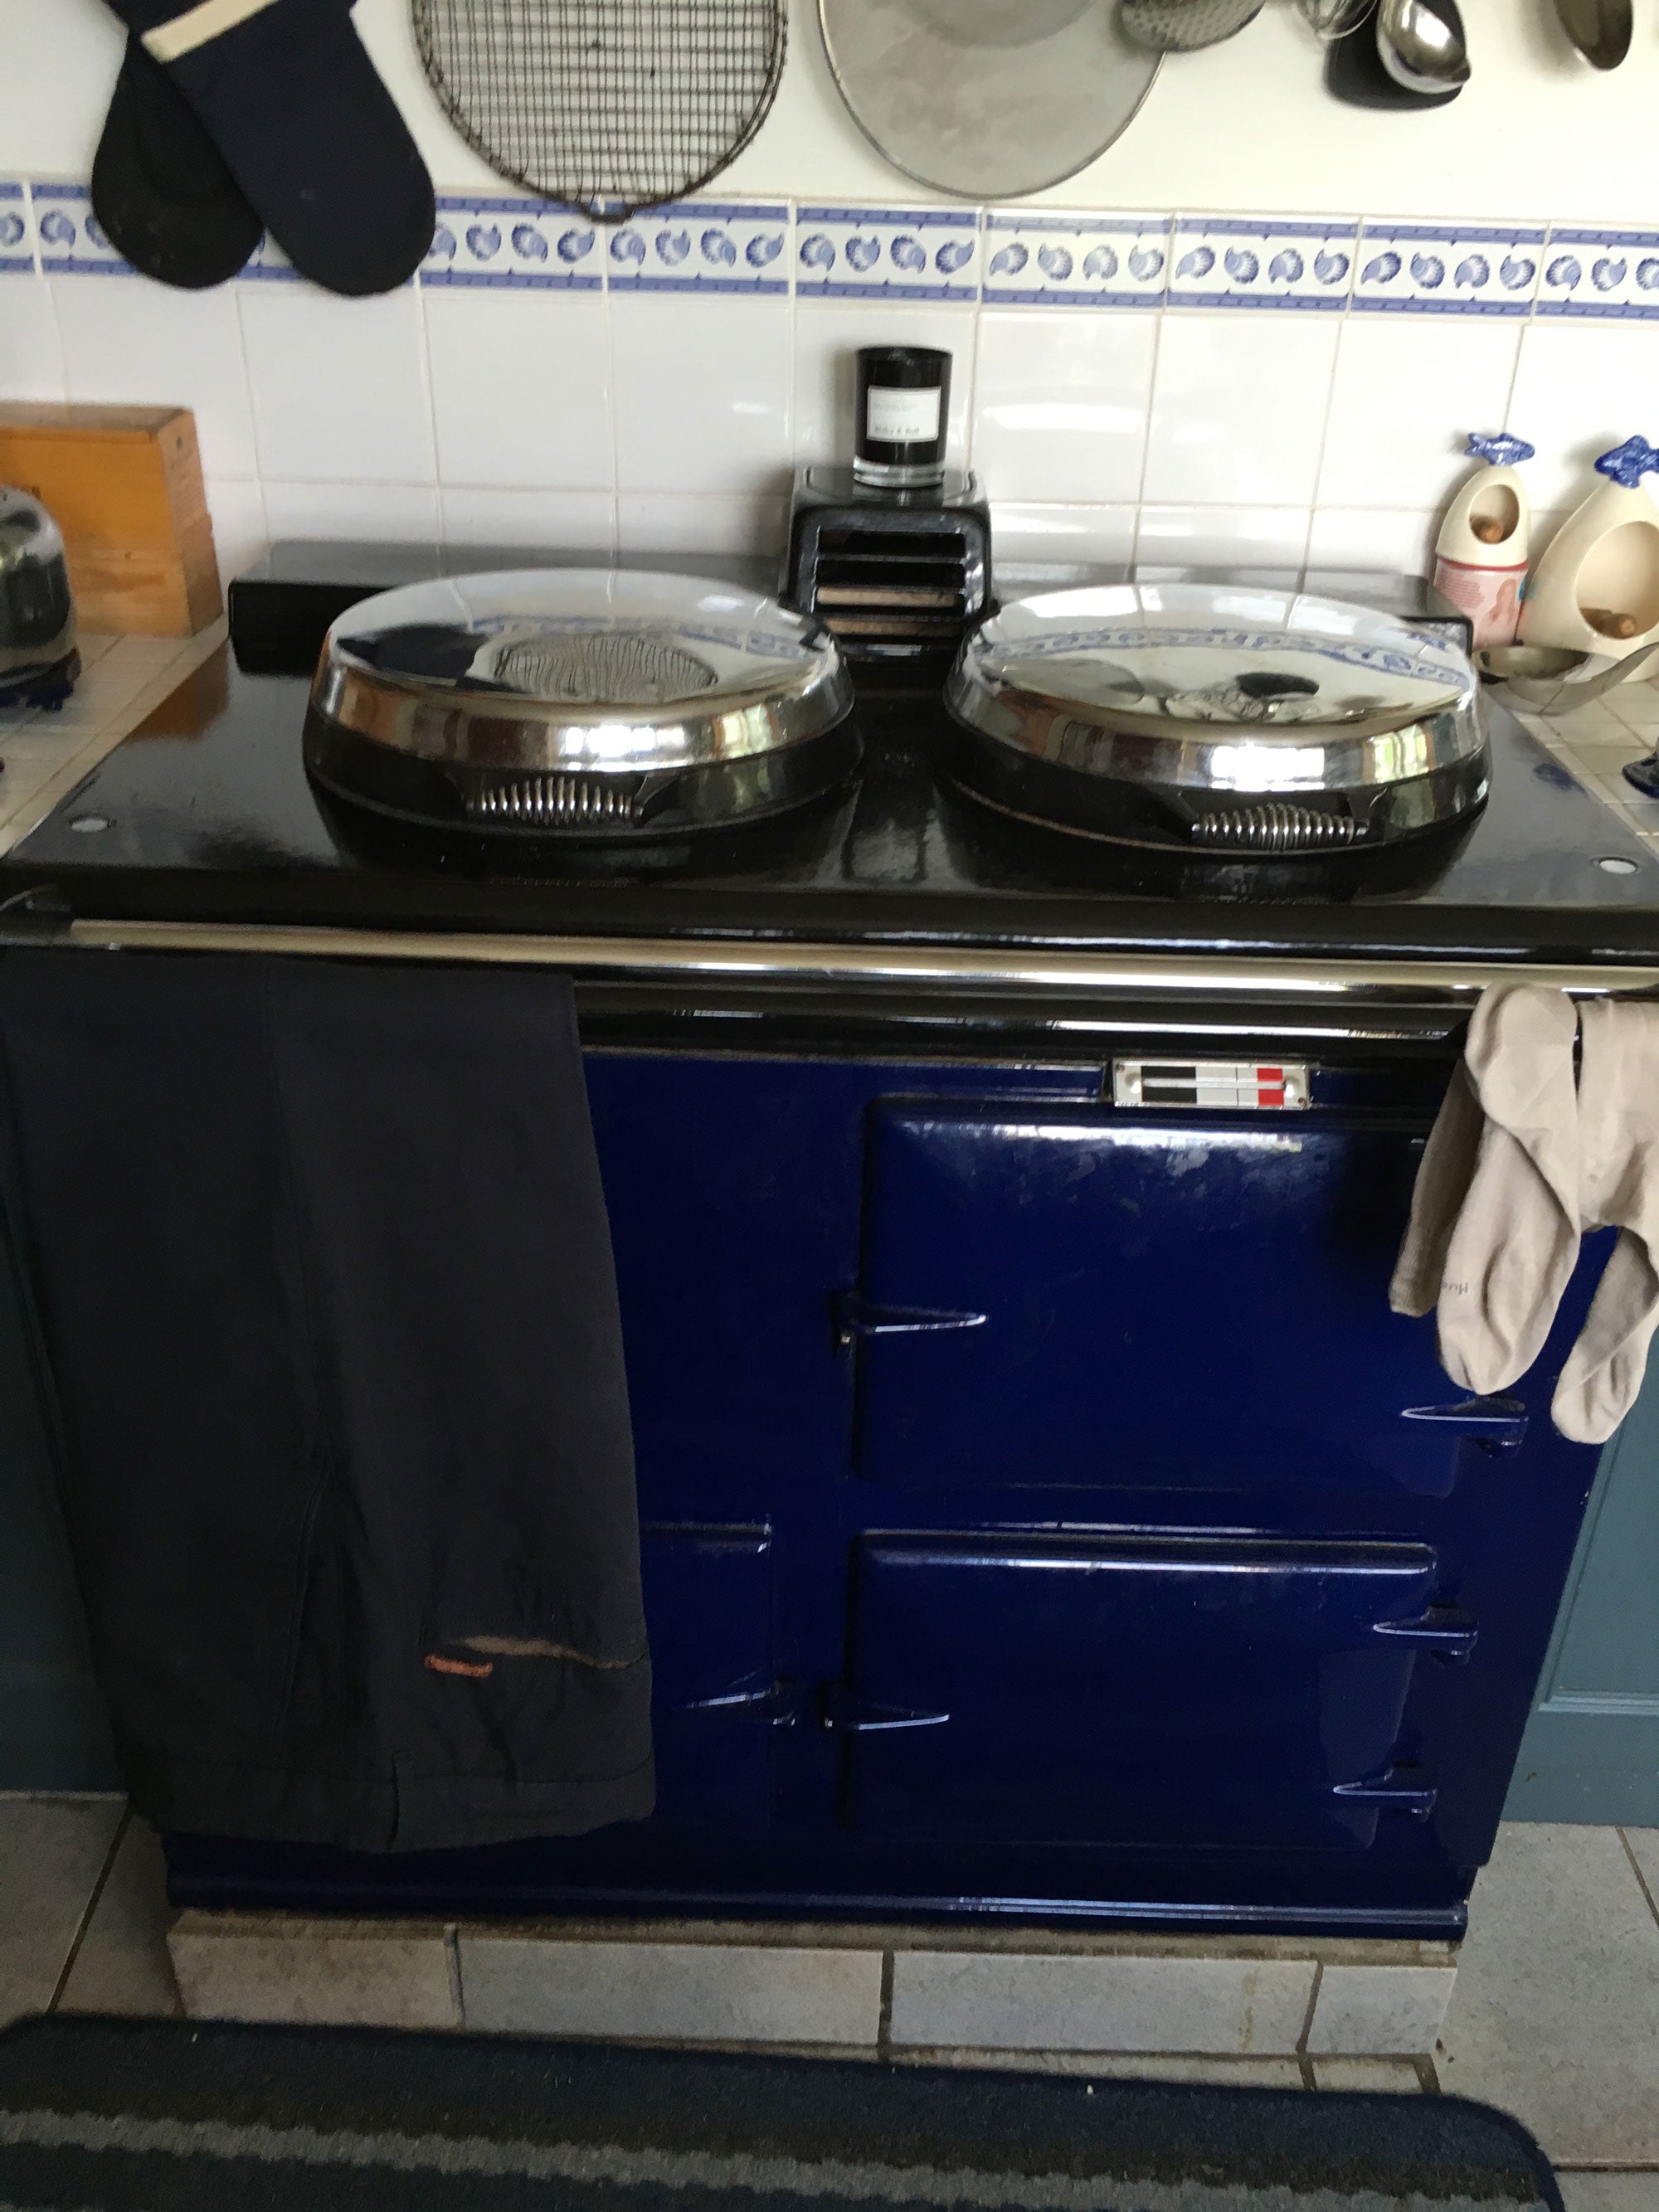 Blue Aga range cooker with drying rail